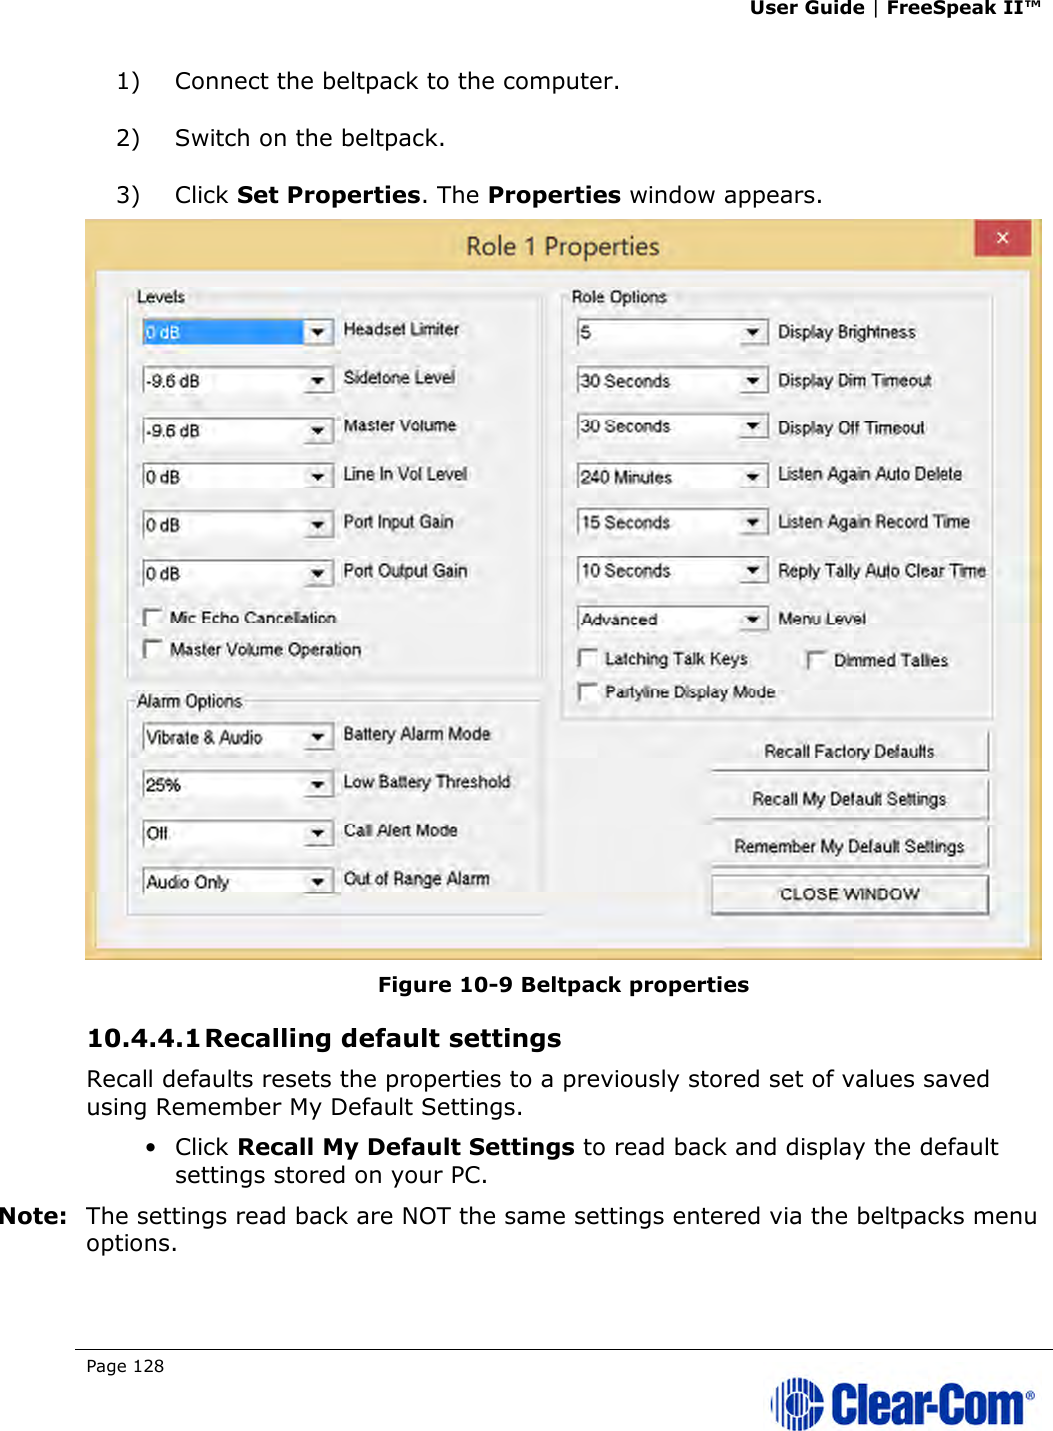 User Guide | FreeSpeak II™  Page 128   1) Connect the beltpack to the computer. 2) Switch on the beltpack. 3) Click Set Properties. The Properties window appears.  Figure 10-9 Beltpack properties 10.4.4.1 Recalling default settings Recall defaults resets the properties to a previously stored set of values saved using Remember My Default Settings. • Click Recall My Default Settings to read back and display the default settings stored on your PC.  Note: The settings read back are NOT the same settings entered via the beltpacks menu options. 